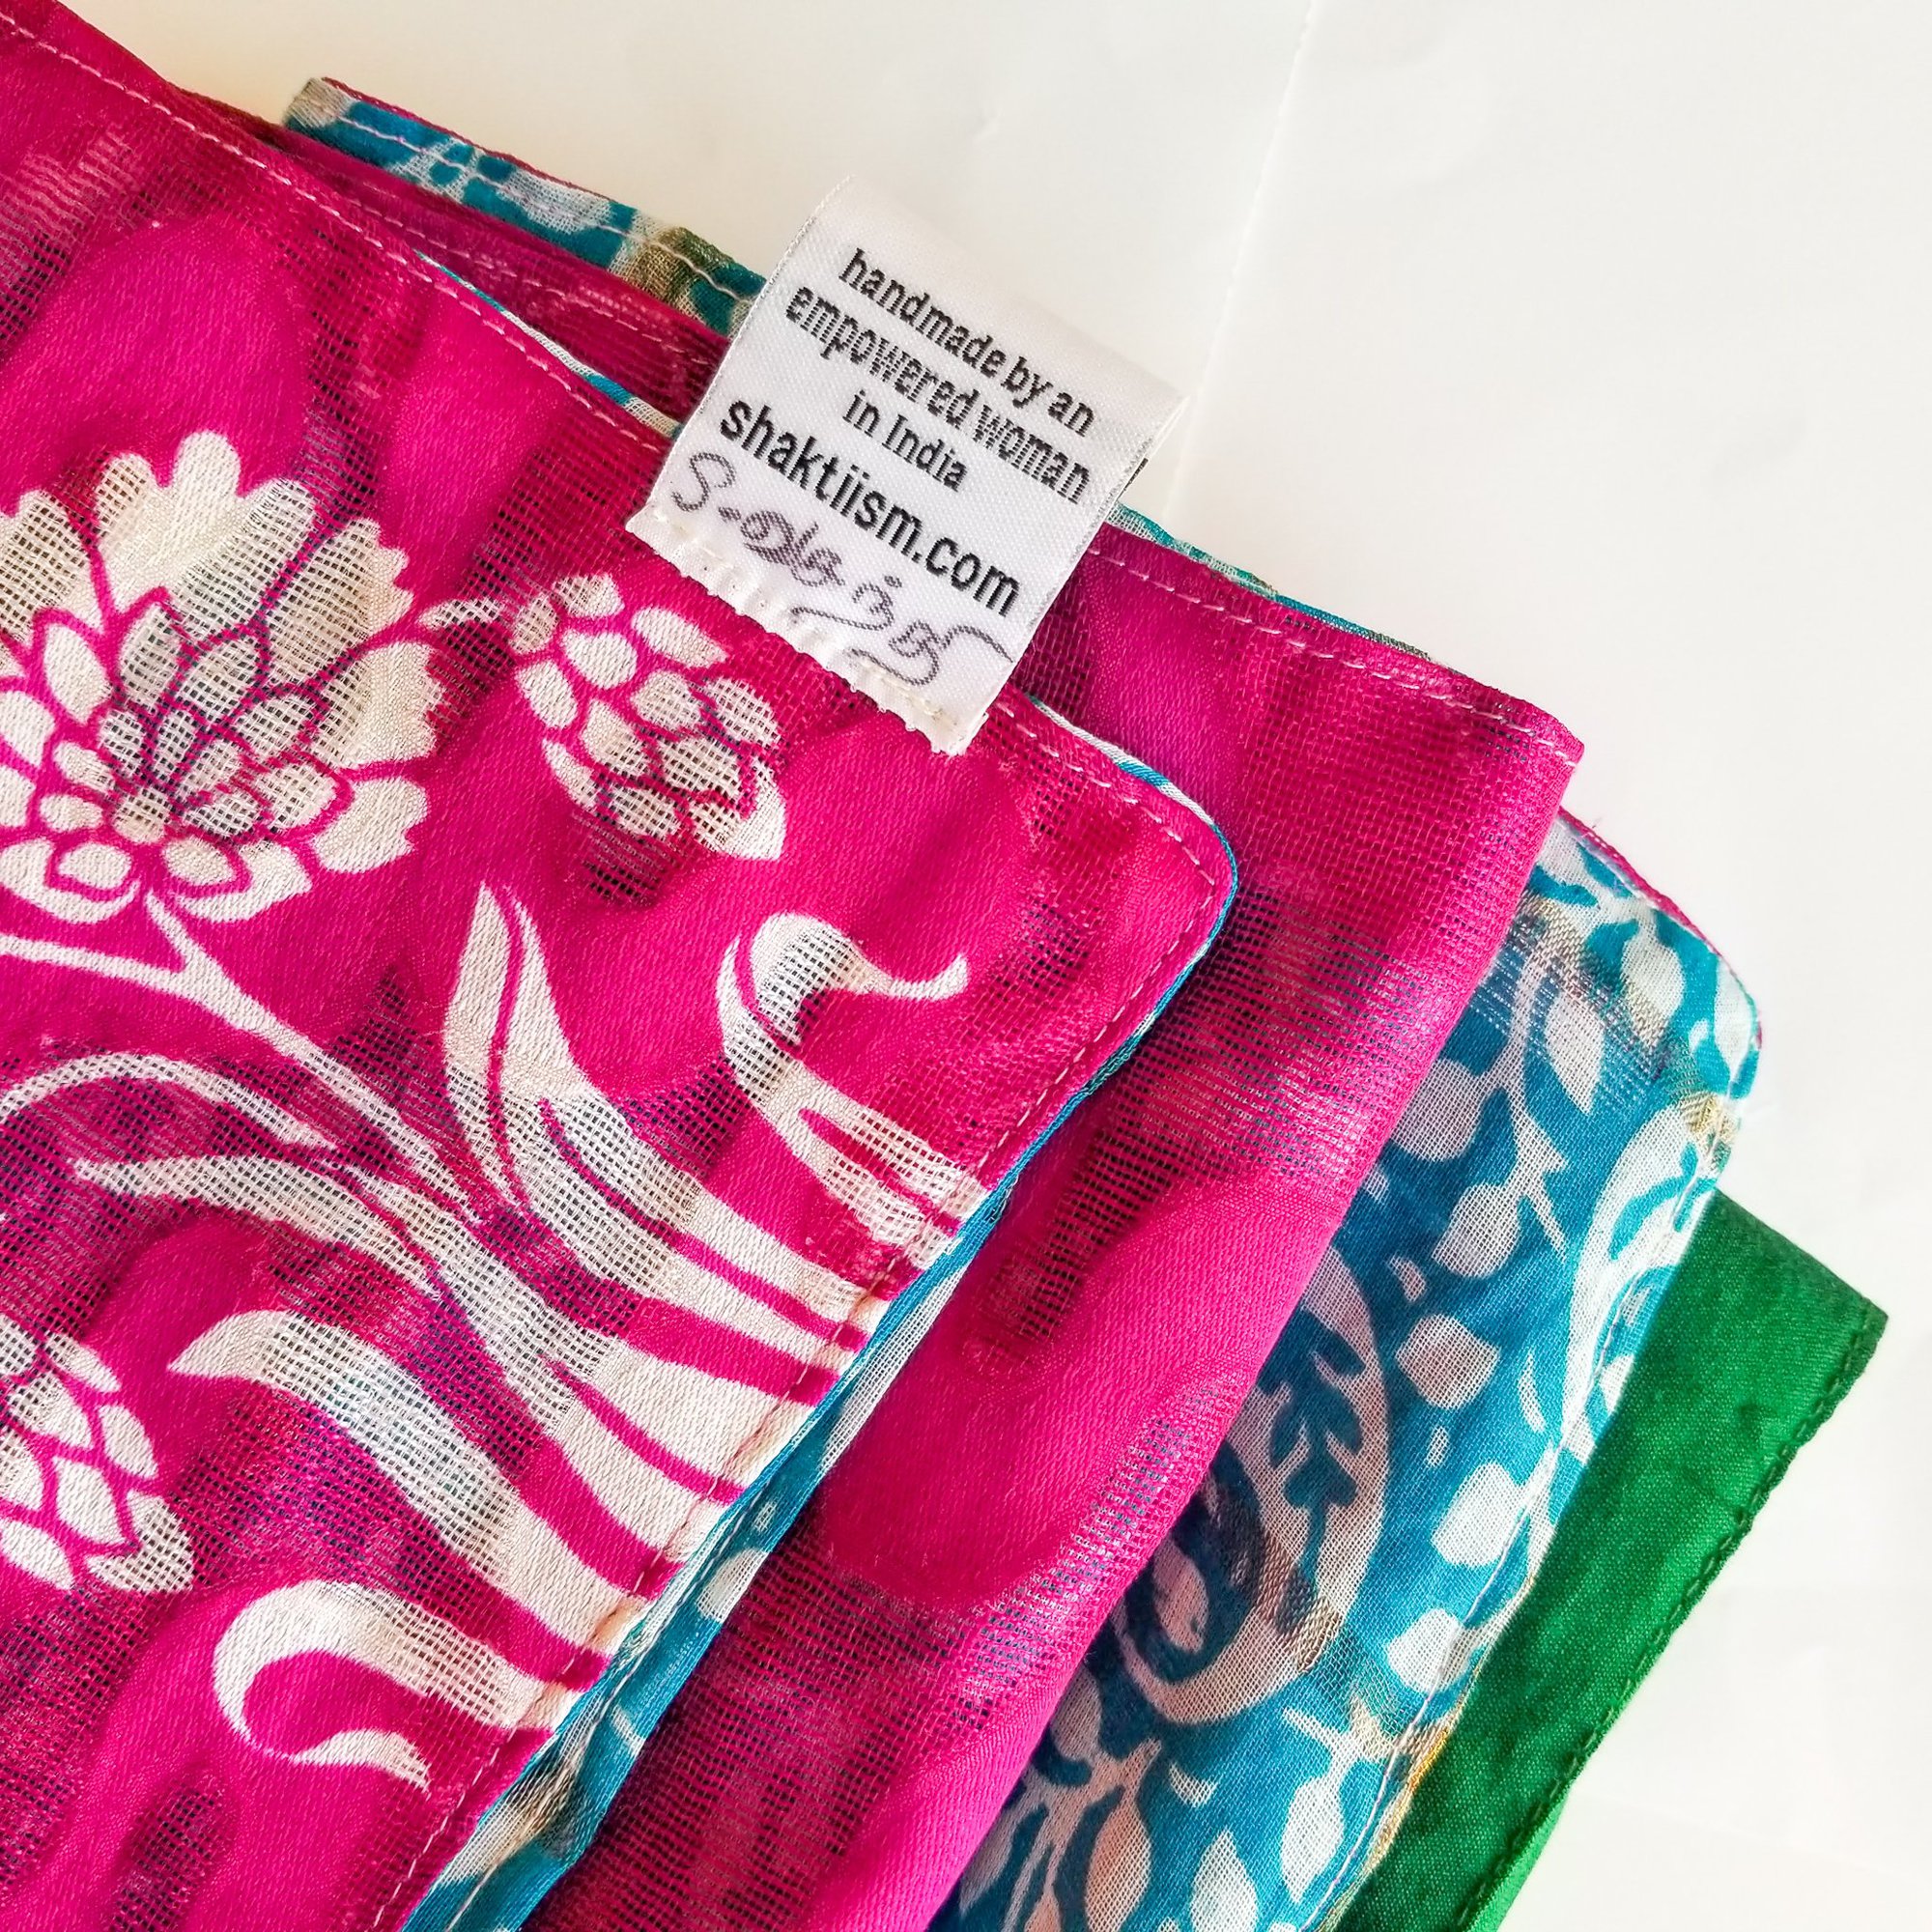 Upcycled sari gift wrap (double-sided, made from 2 complimentary saris)